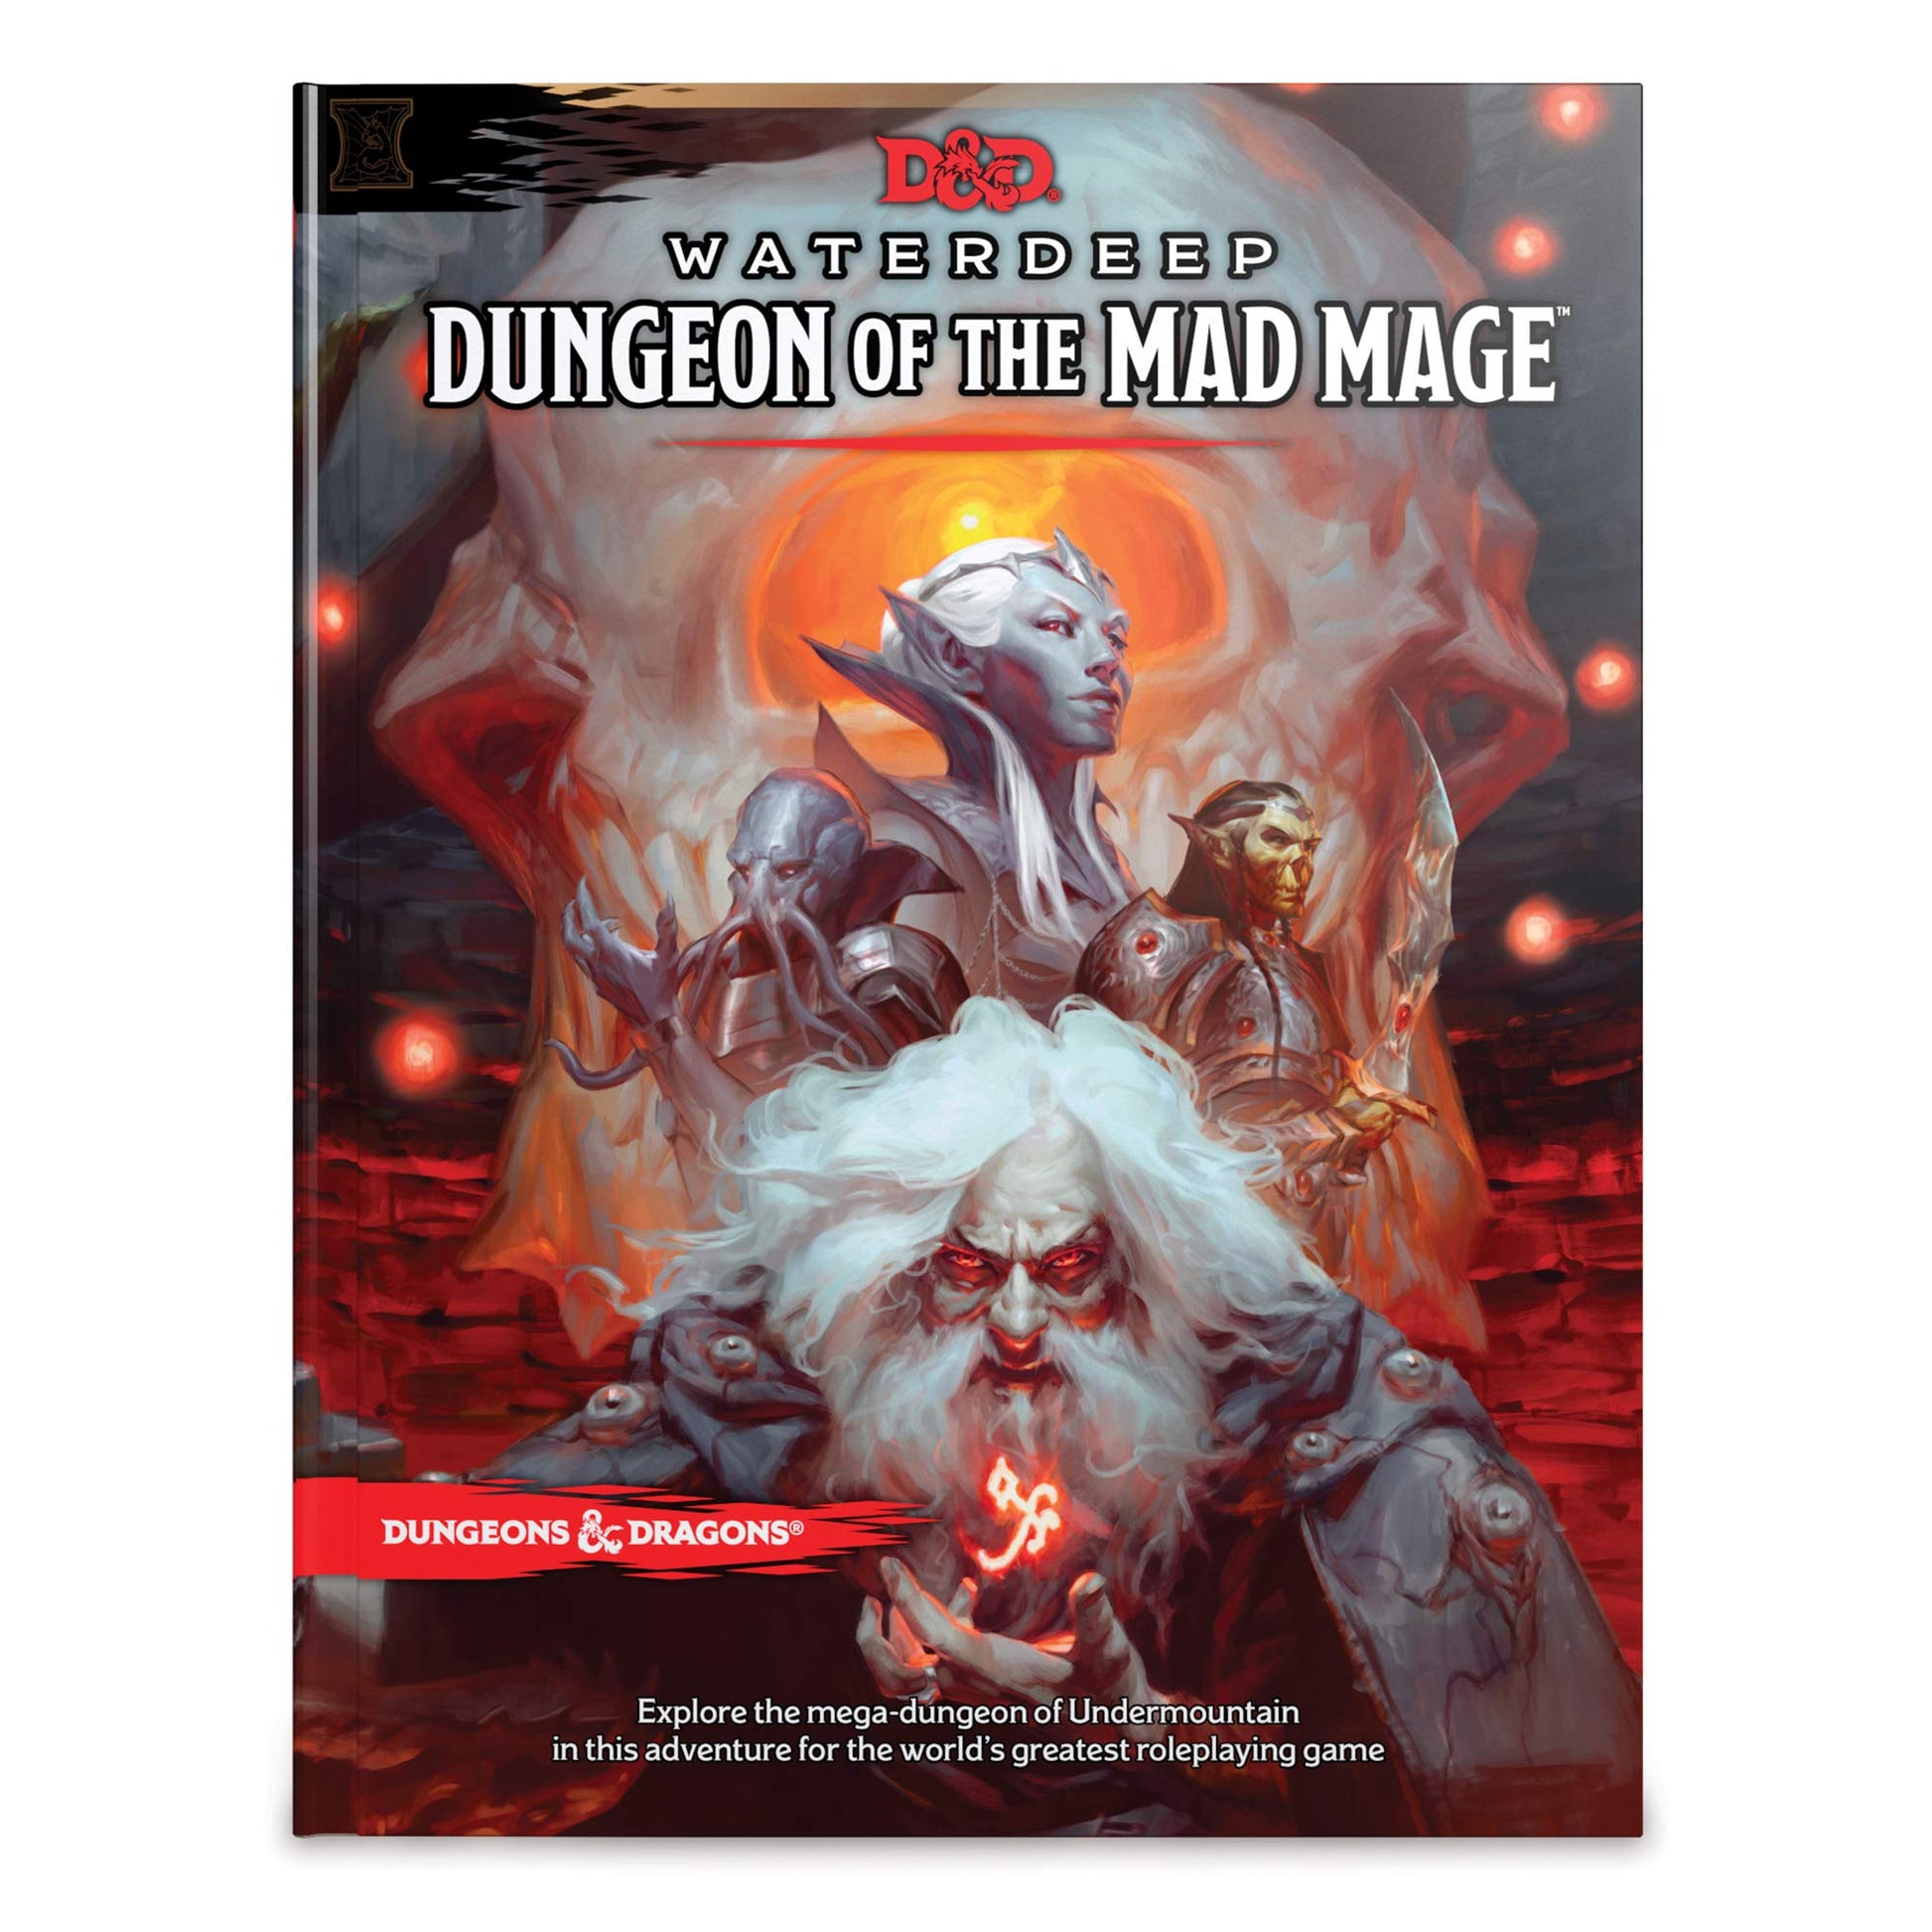 Dungeons & Dragons Waterdeep: Dungeon Of The Mad Mage (Adventure Book, D&D Roleplaying Game) (D&D Adventure) - Dungeons and Dragons - The Hooded Goblin